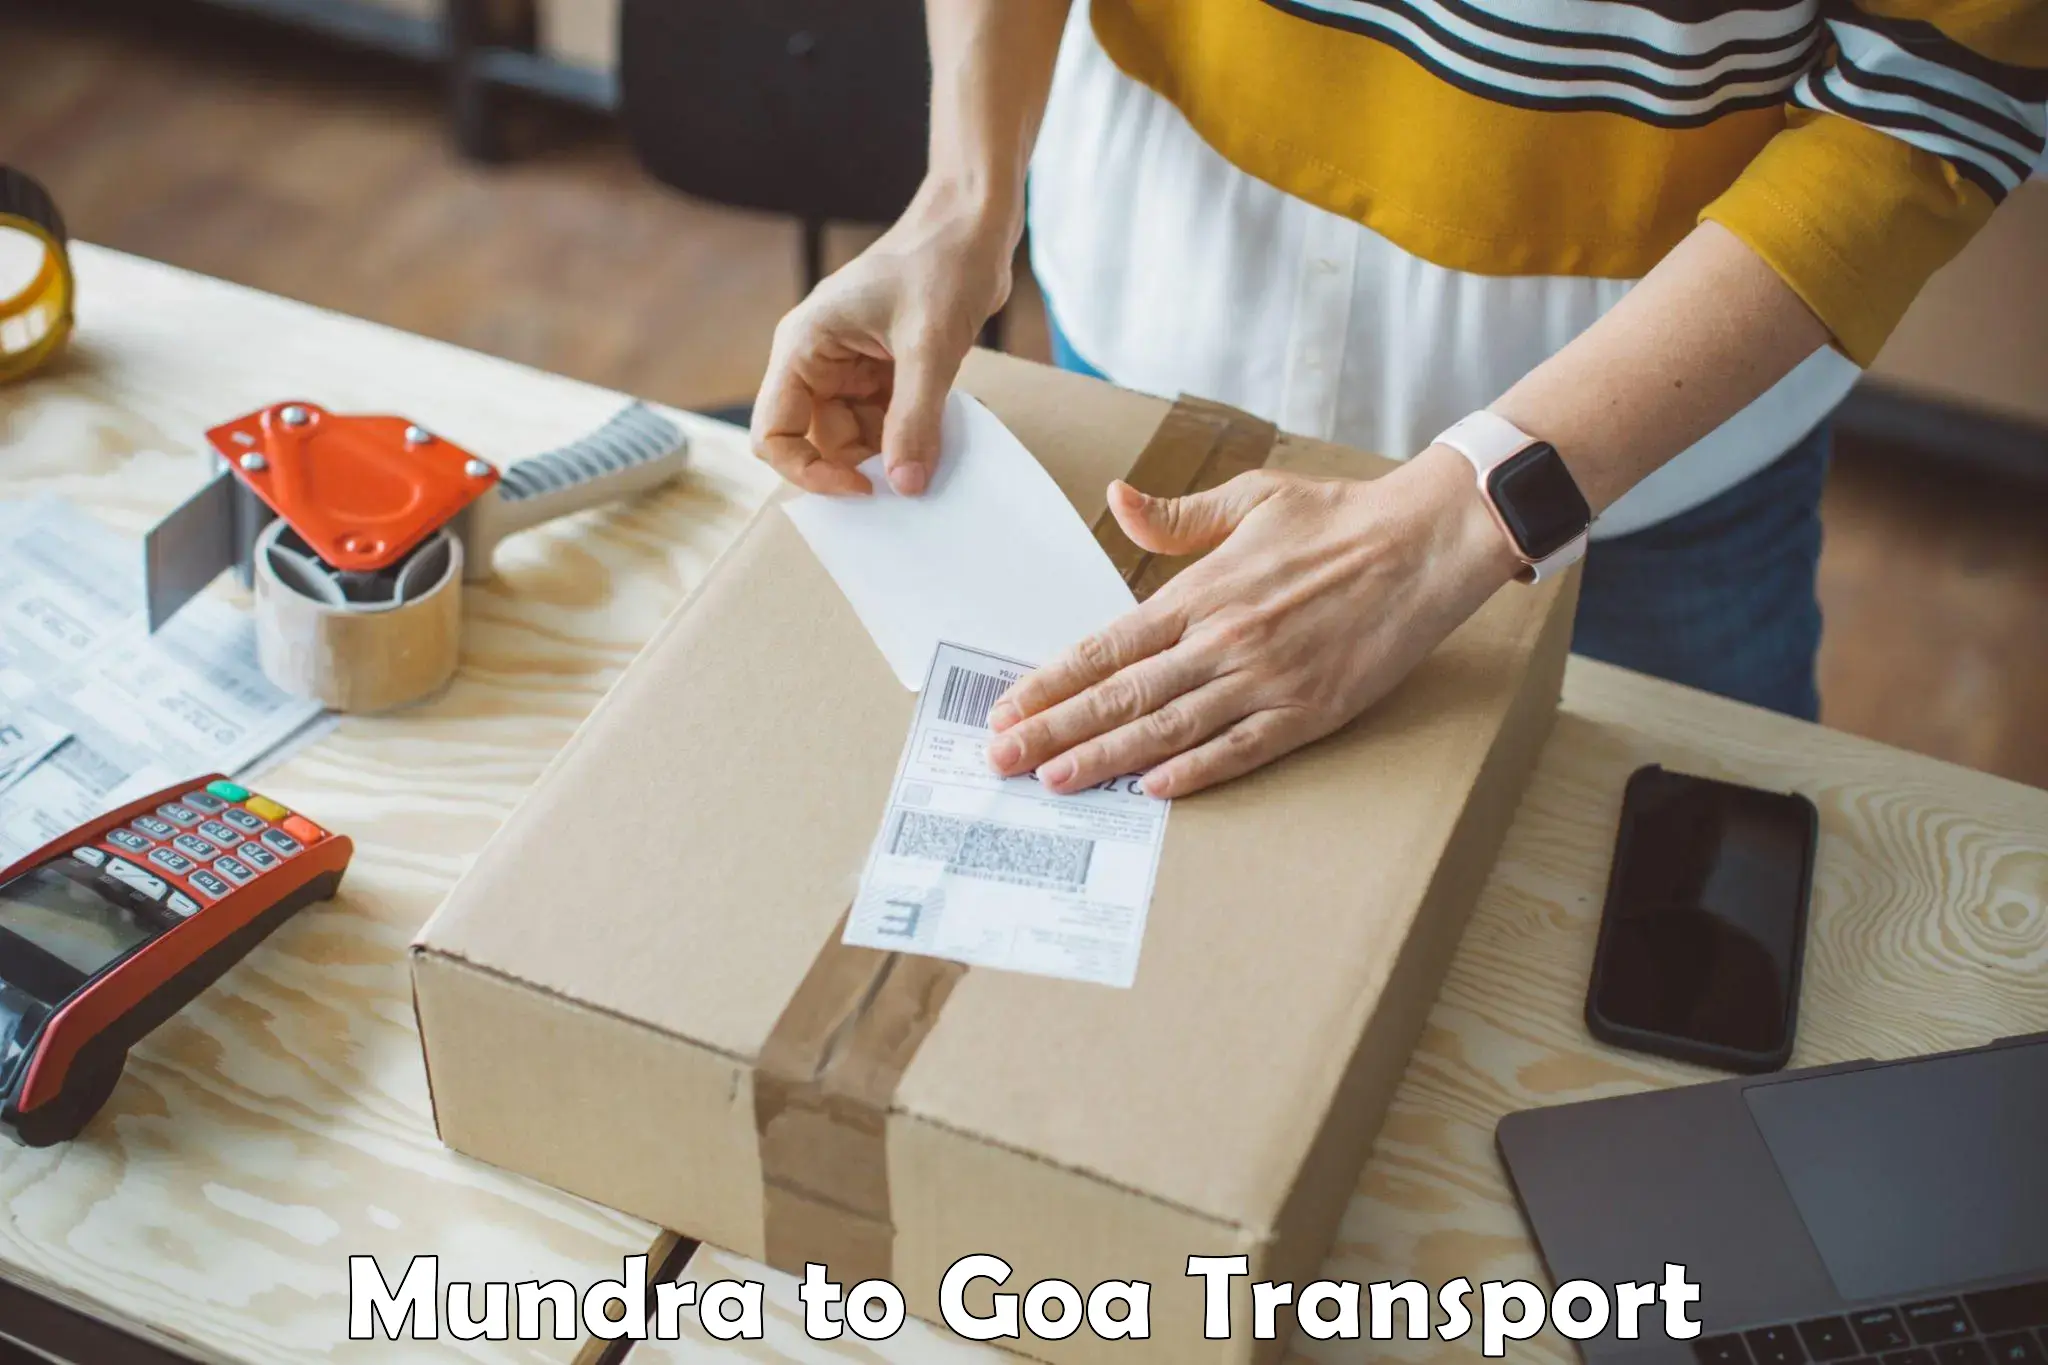 Container transport service Mundra to Goa